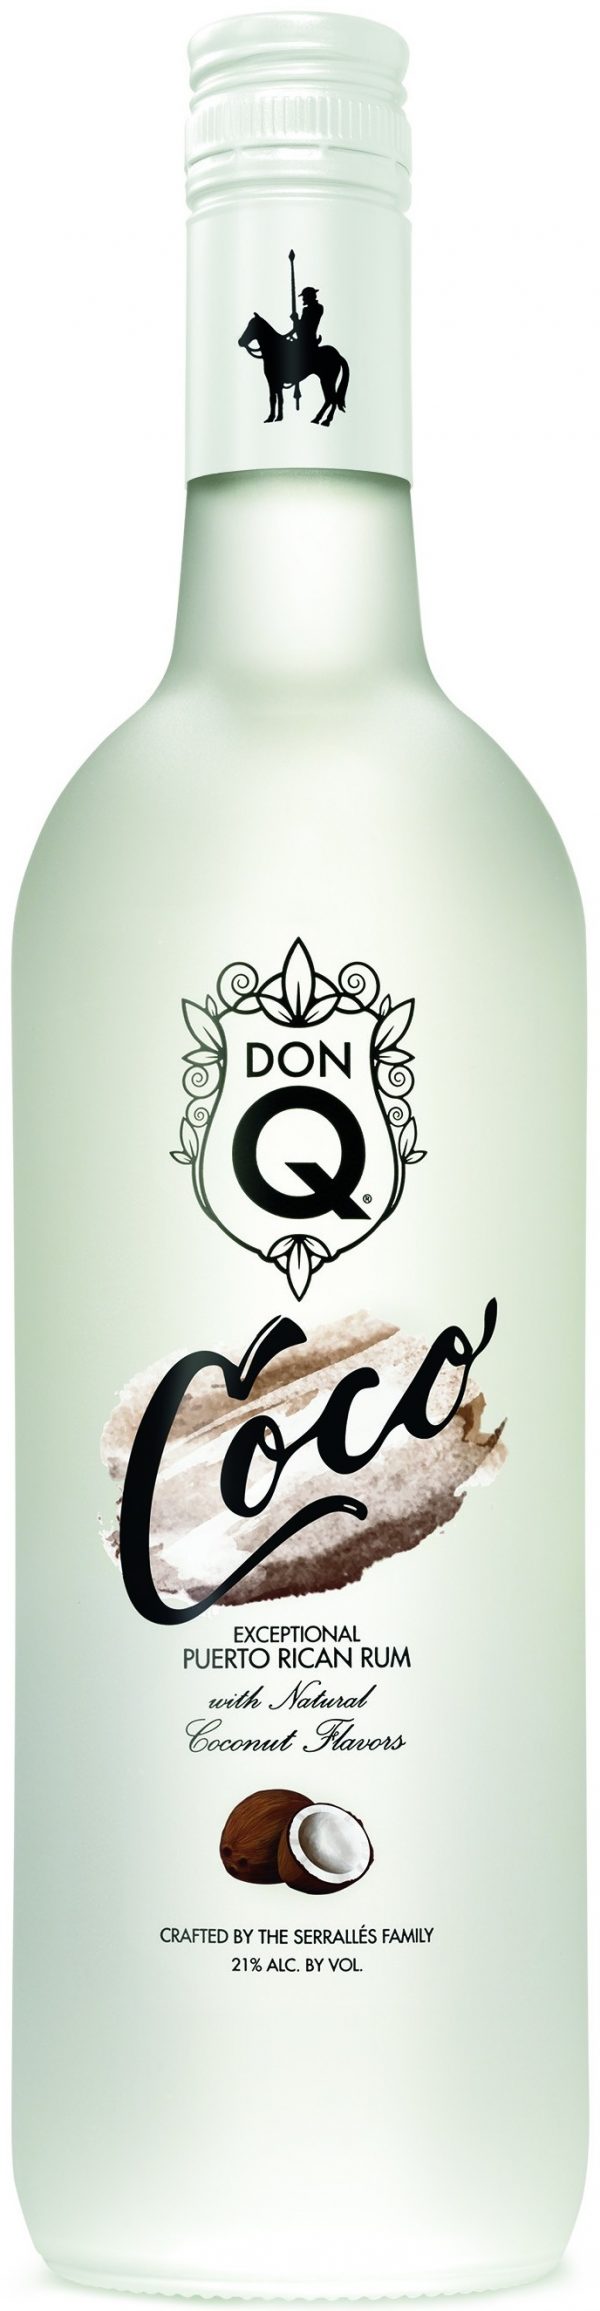 Zoom to enlarge the Don Q Coco Rum